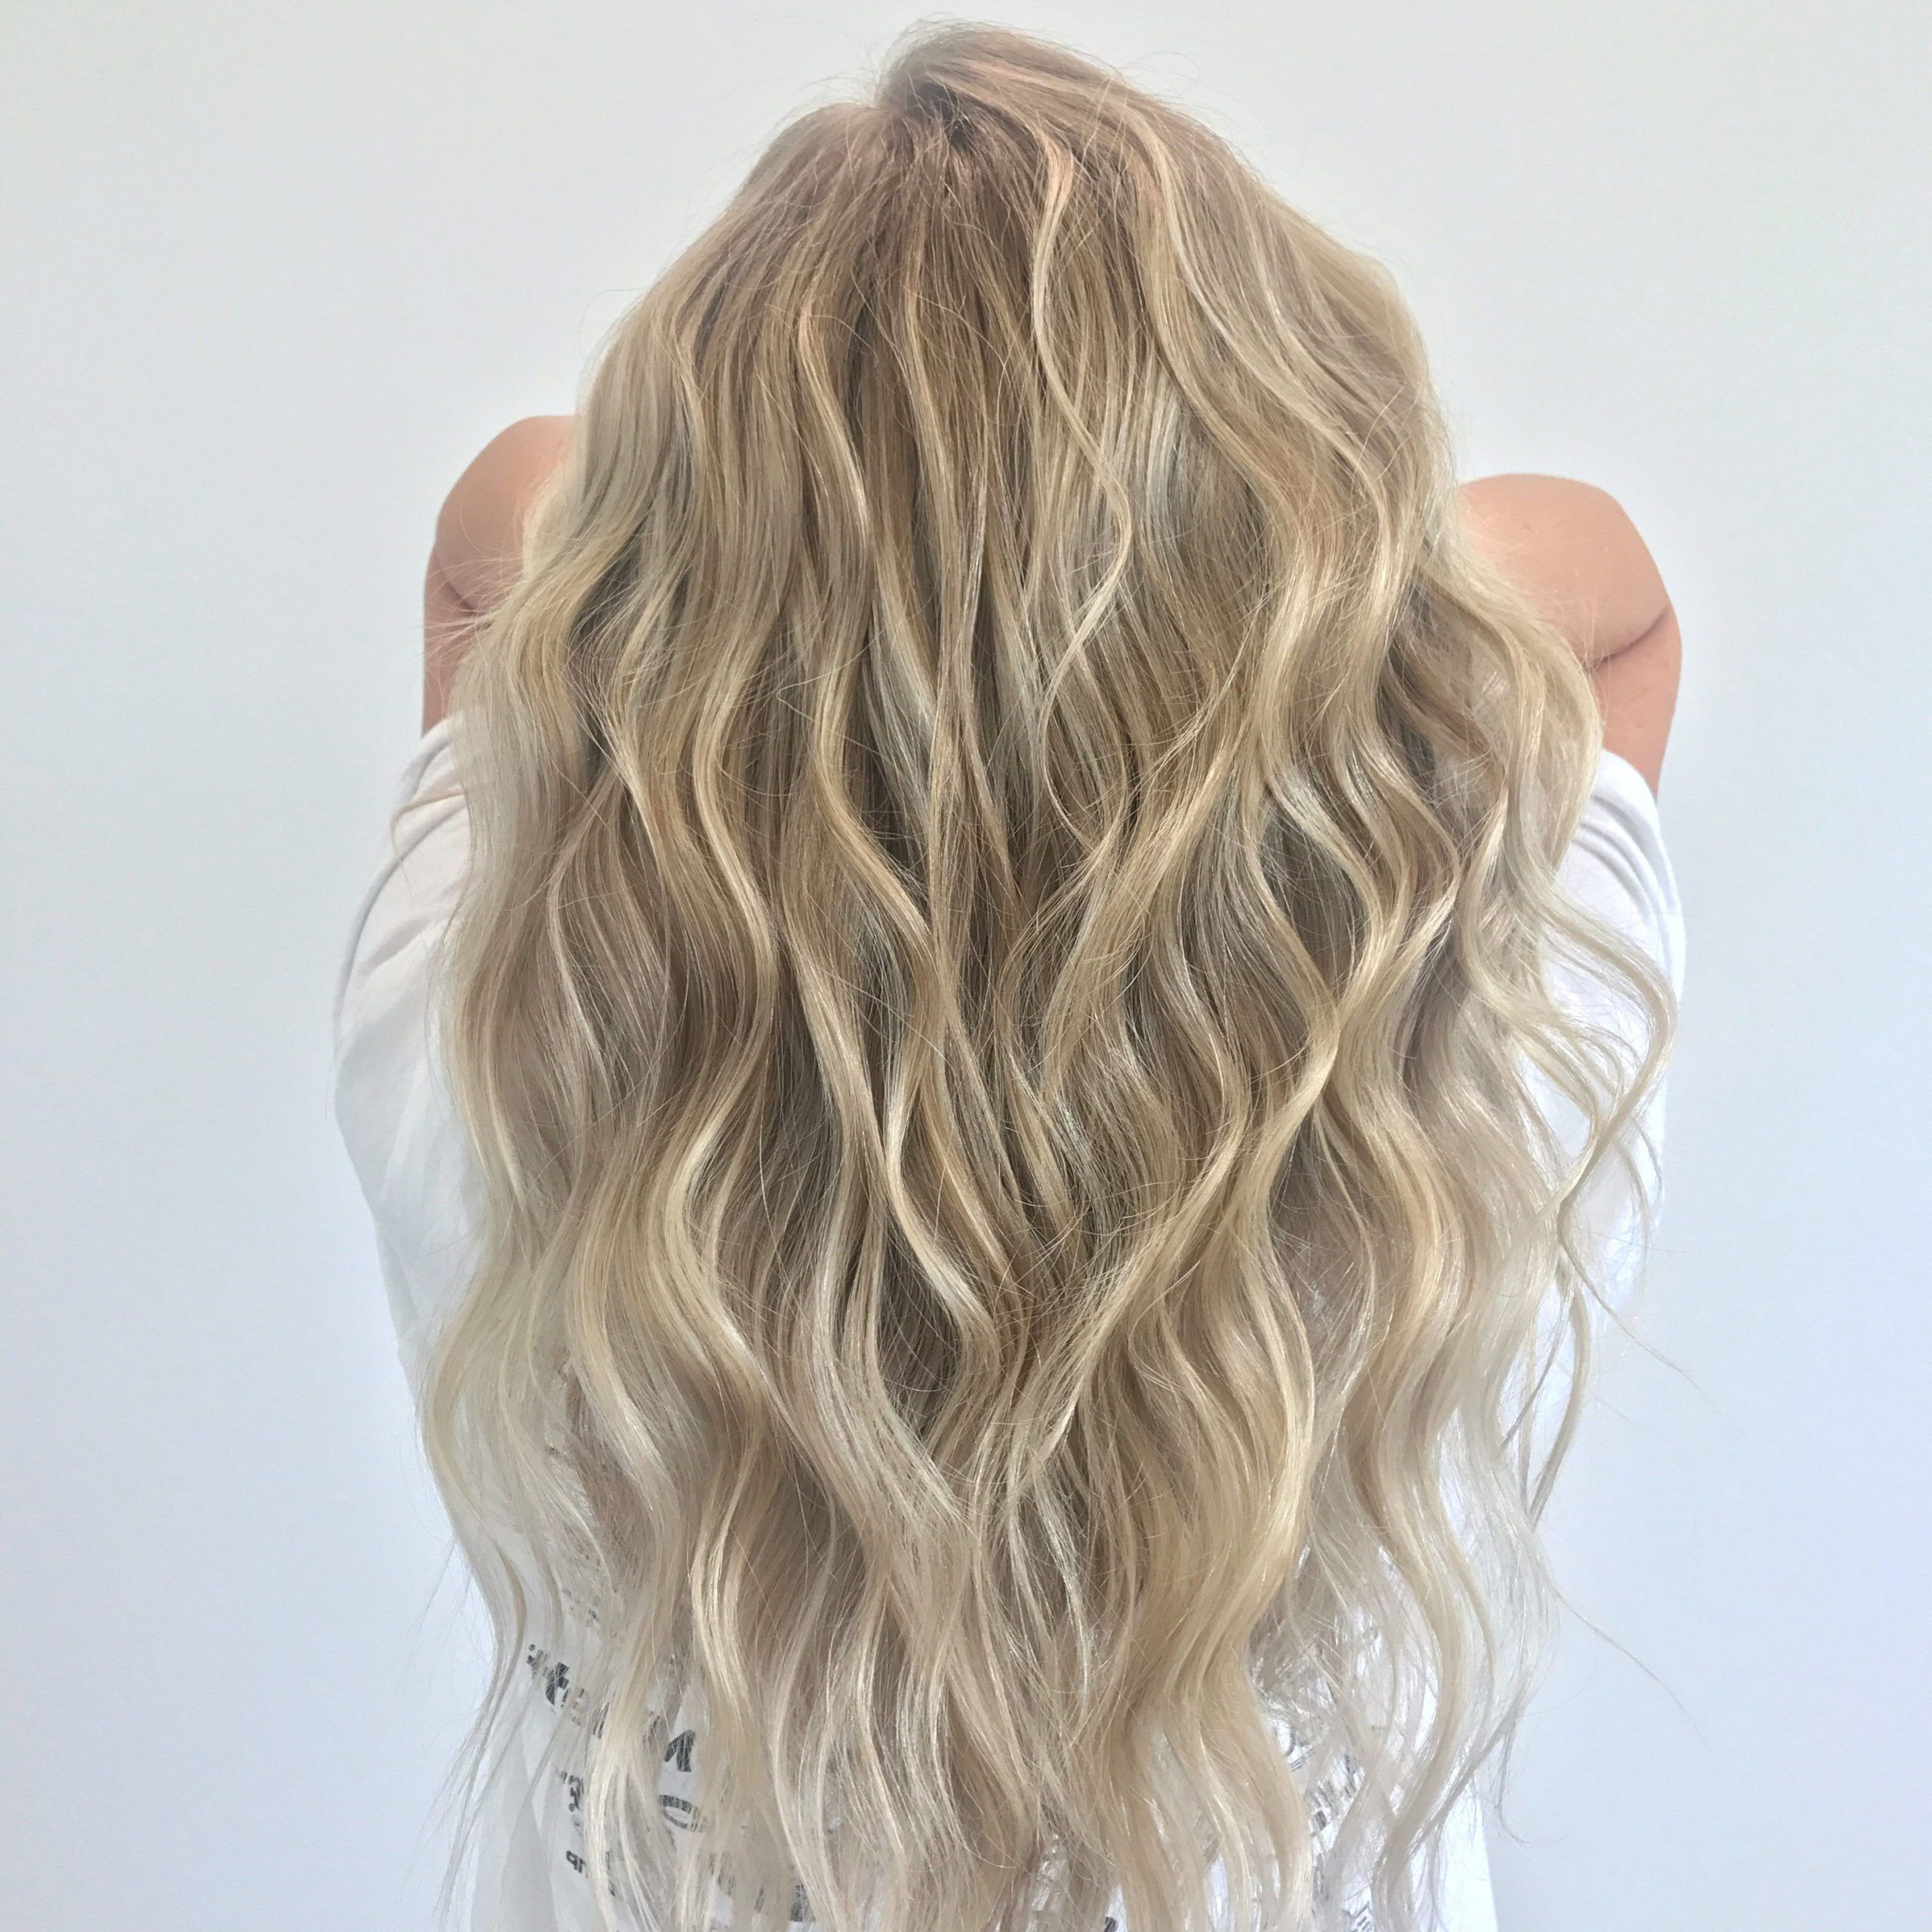 Fashionable Icy Blonde Beach Waves Haircuts With Platinum Blonde, Blonde Hair, Beach Waves, Long Hair, Balayage, Foilayage, Icy  Blonde, Hair Color Ideas (View 19 of 20)